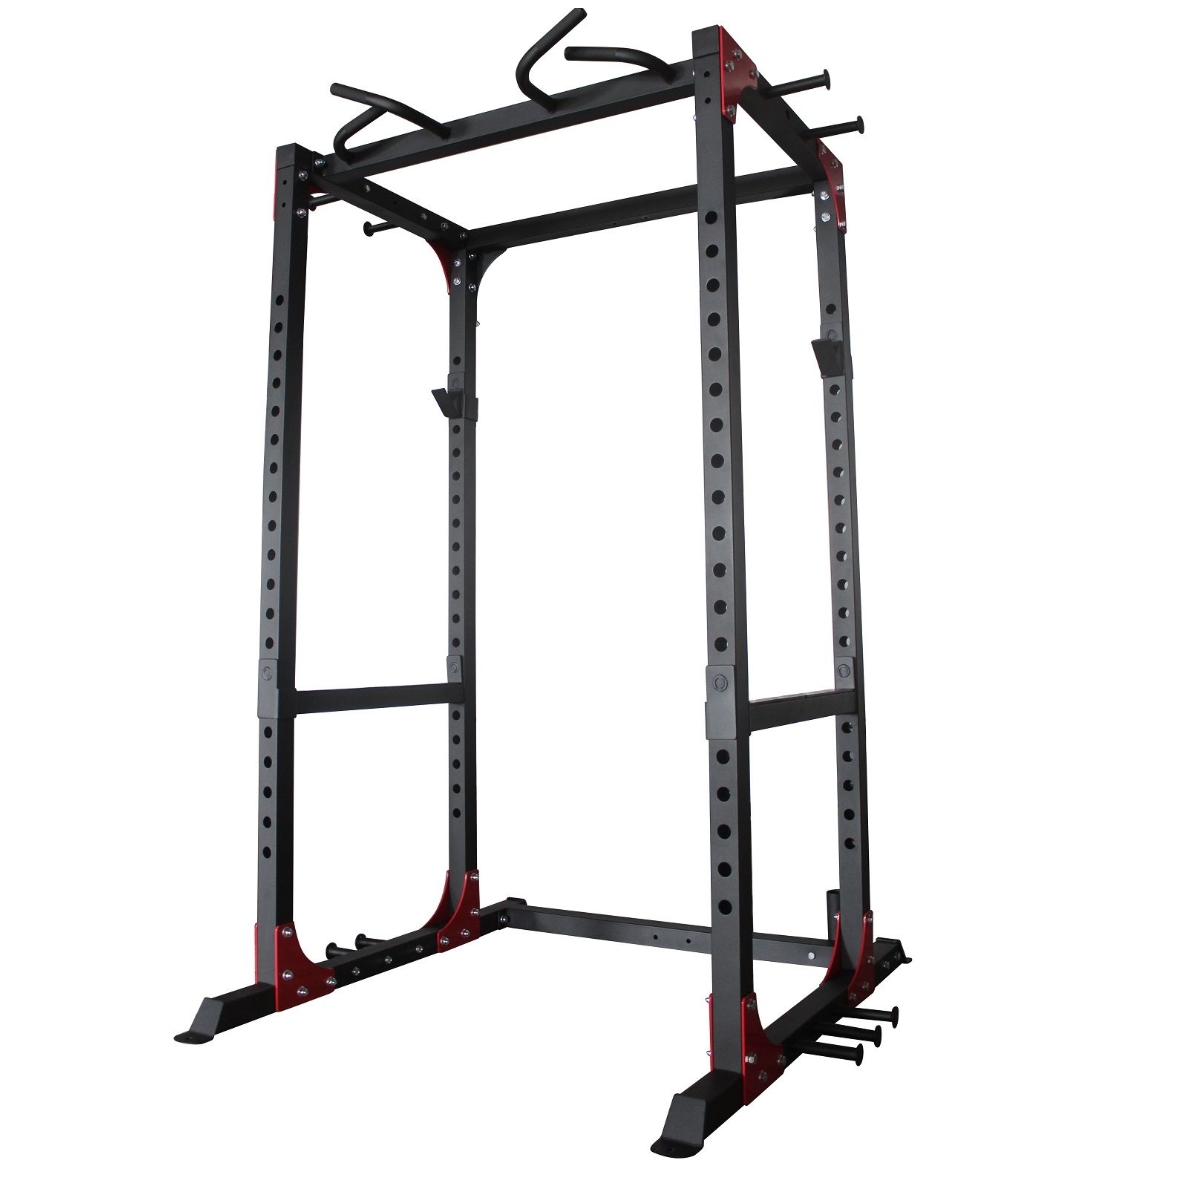 Masterfit X-fit Cage DEMO